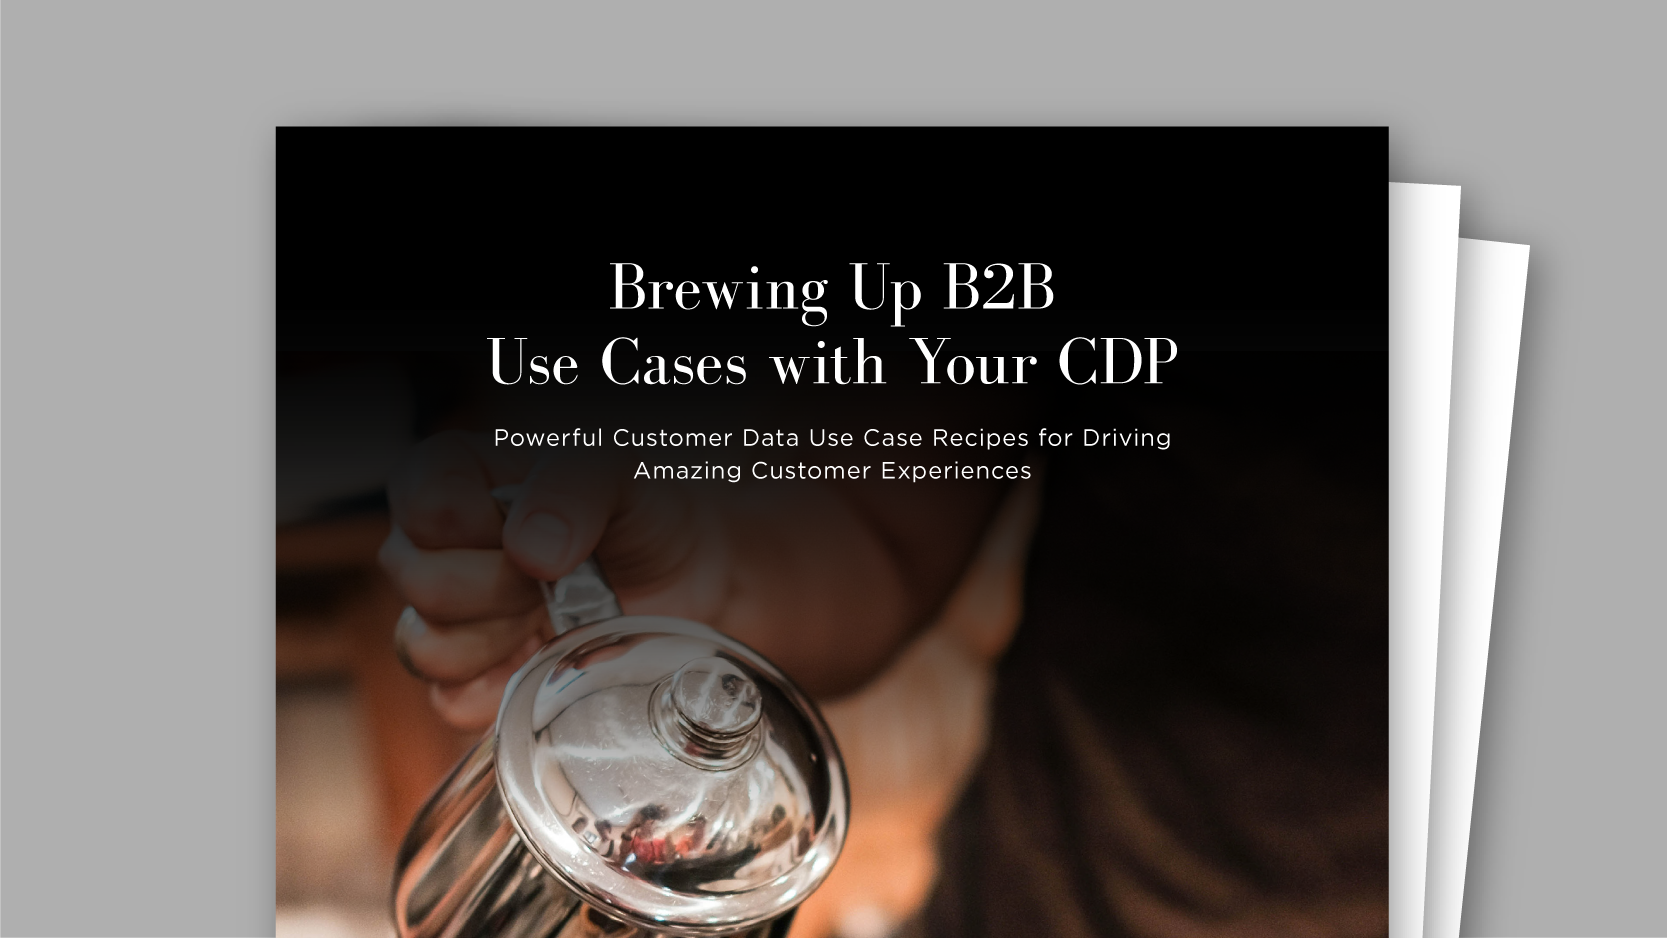 B2B Uses Cases with Your CDP